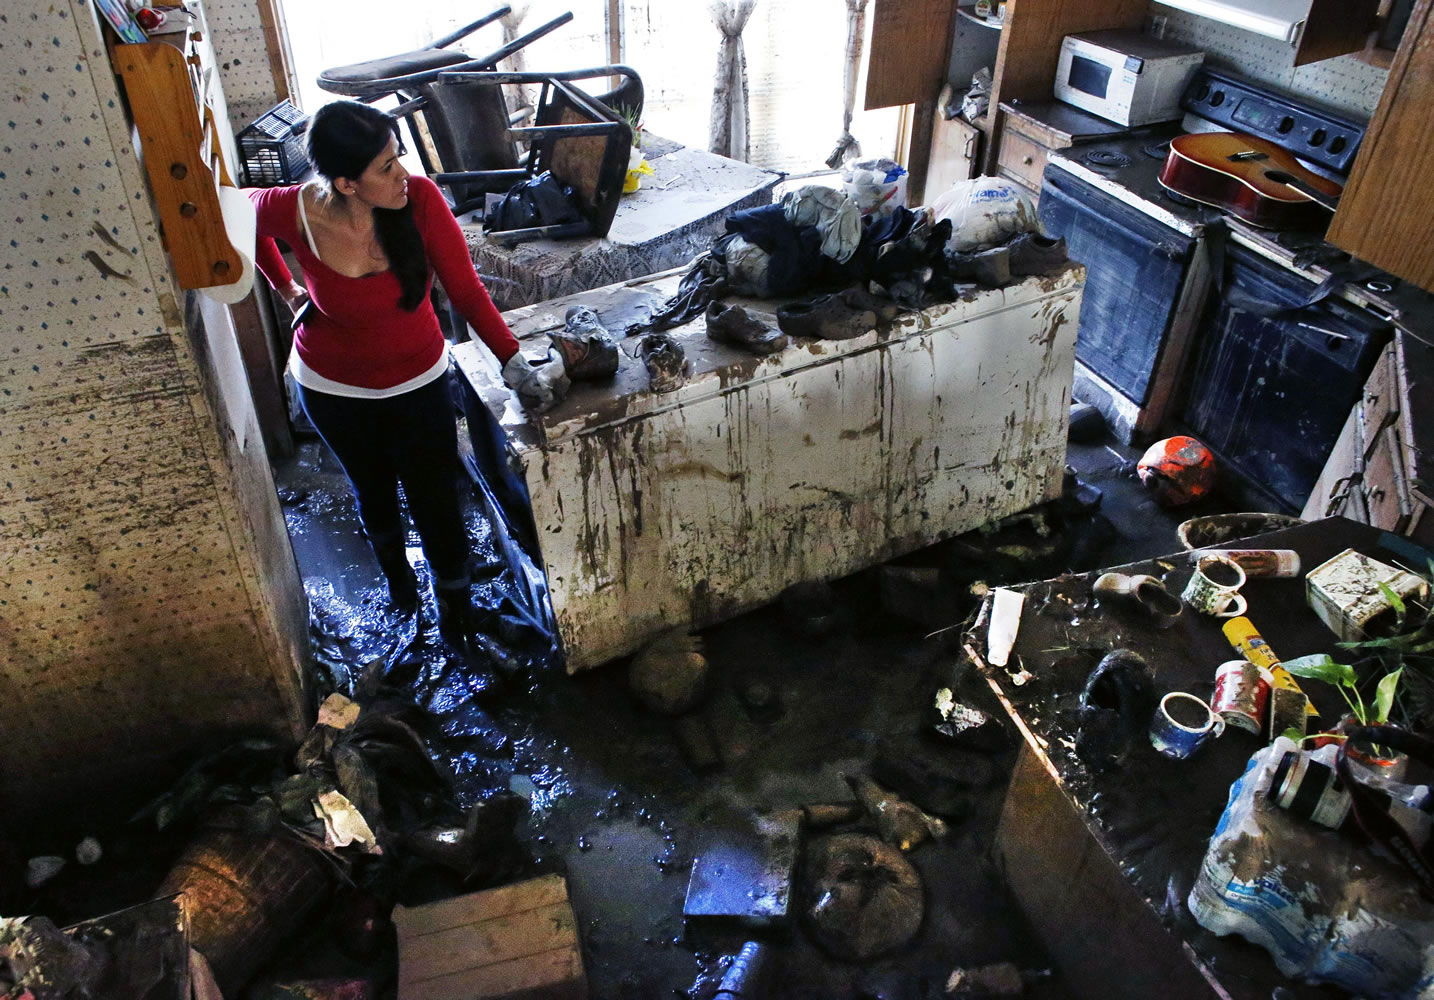 Sonia Marquez, an organizer with the Colorado Immigrant Rights Coalition, looks for keepsakes Tuesday inside one of the many mobile homes now declared uninhabitable due to flood damage at a decimated trailer park in Evans, Colo.